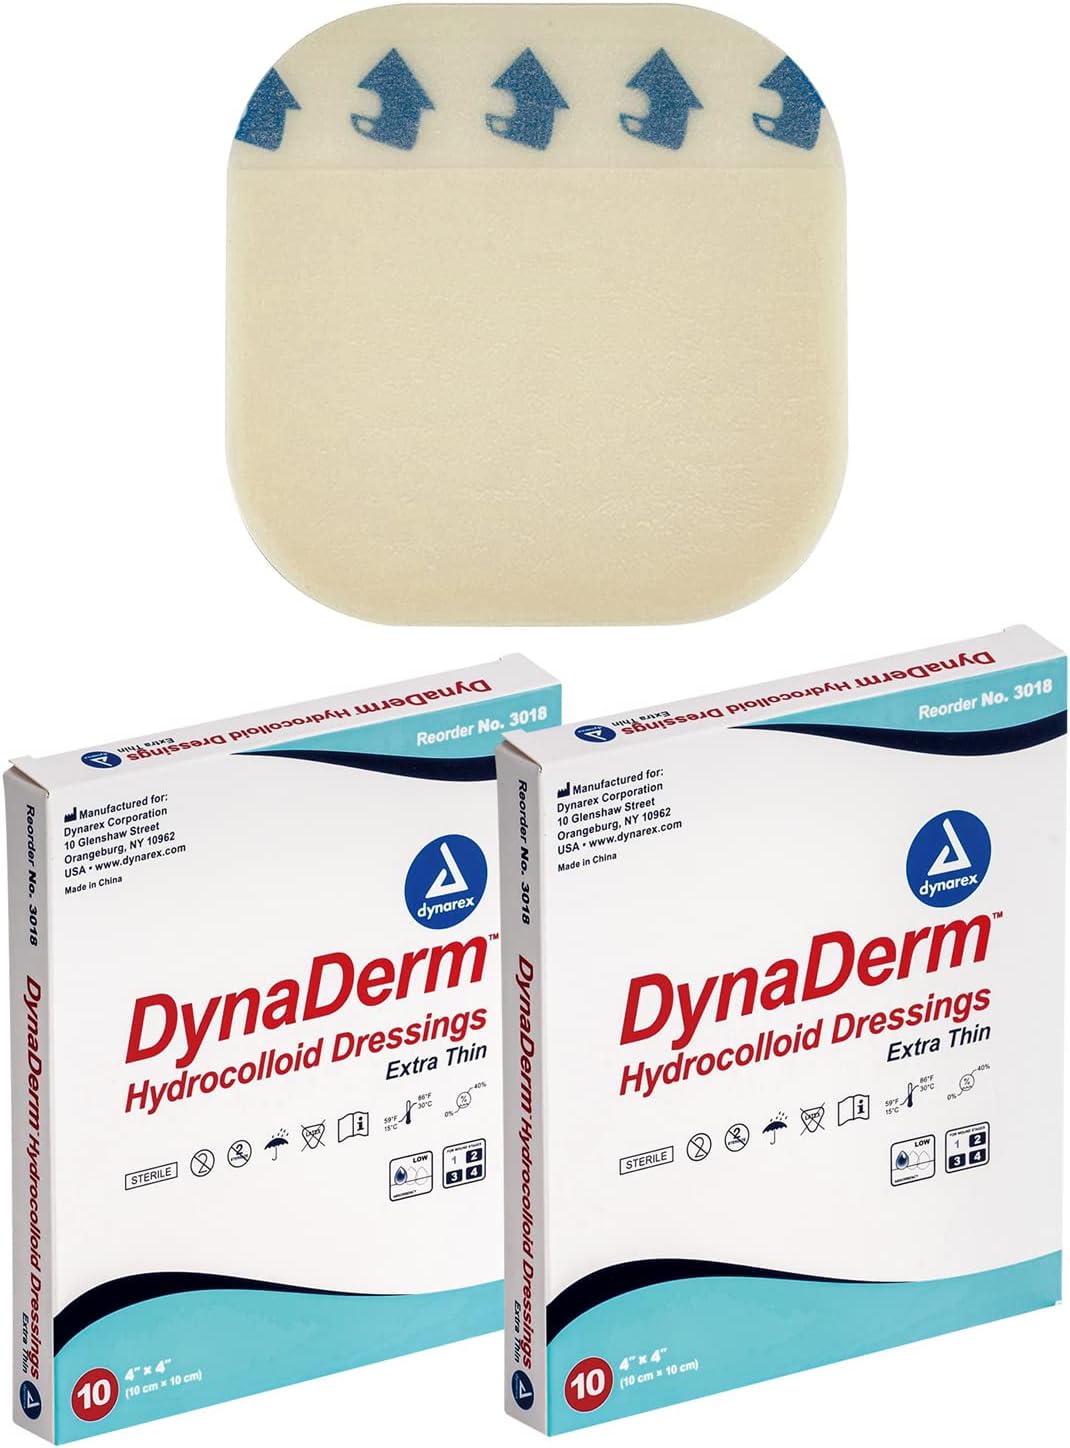 Dynarex DynaDerm Hydrocolloid Dressings, Sterile Moist Bandages Used for All Kinds of Wounds, 4" x 4", X-Thin & Latex-Free, Peel-Down Patches - 2 Boxes of 10 Dressings